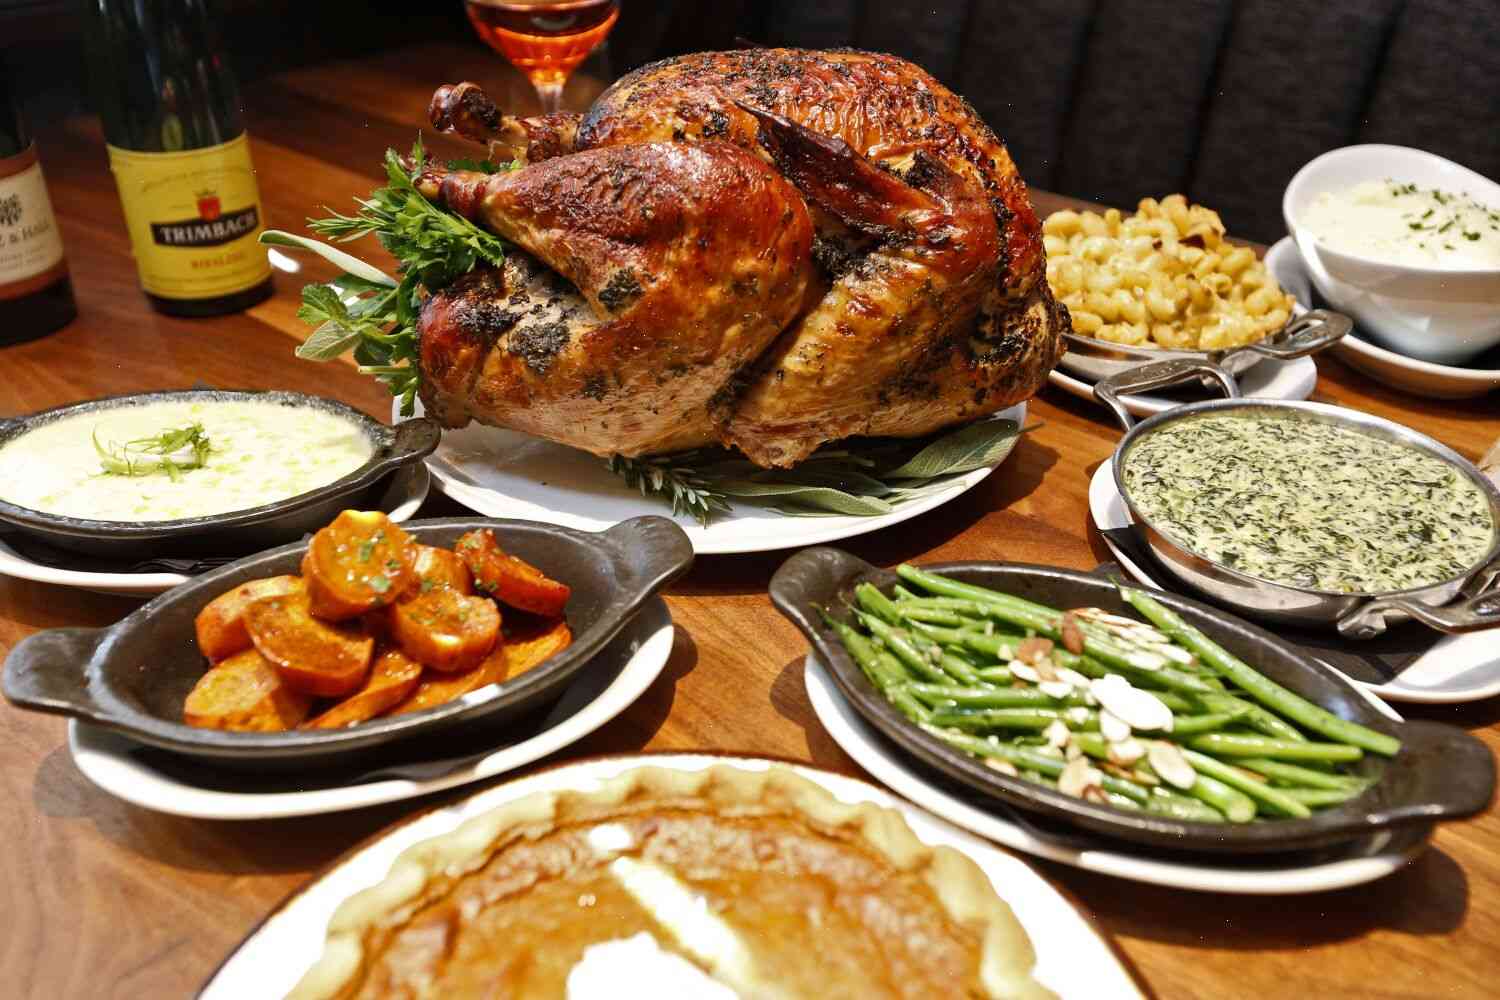 Kayla Smith-Lovvorn’s Thanksgiving Dinner Was Not as Bountiful as It Used to Be